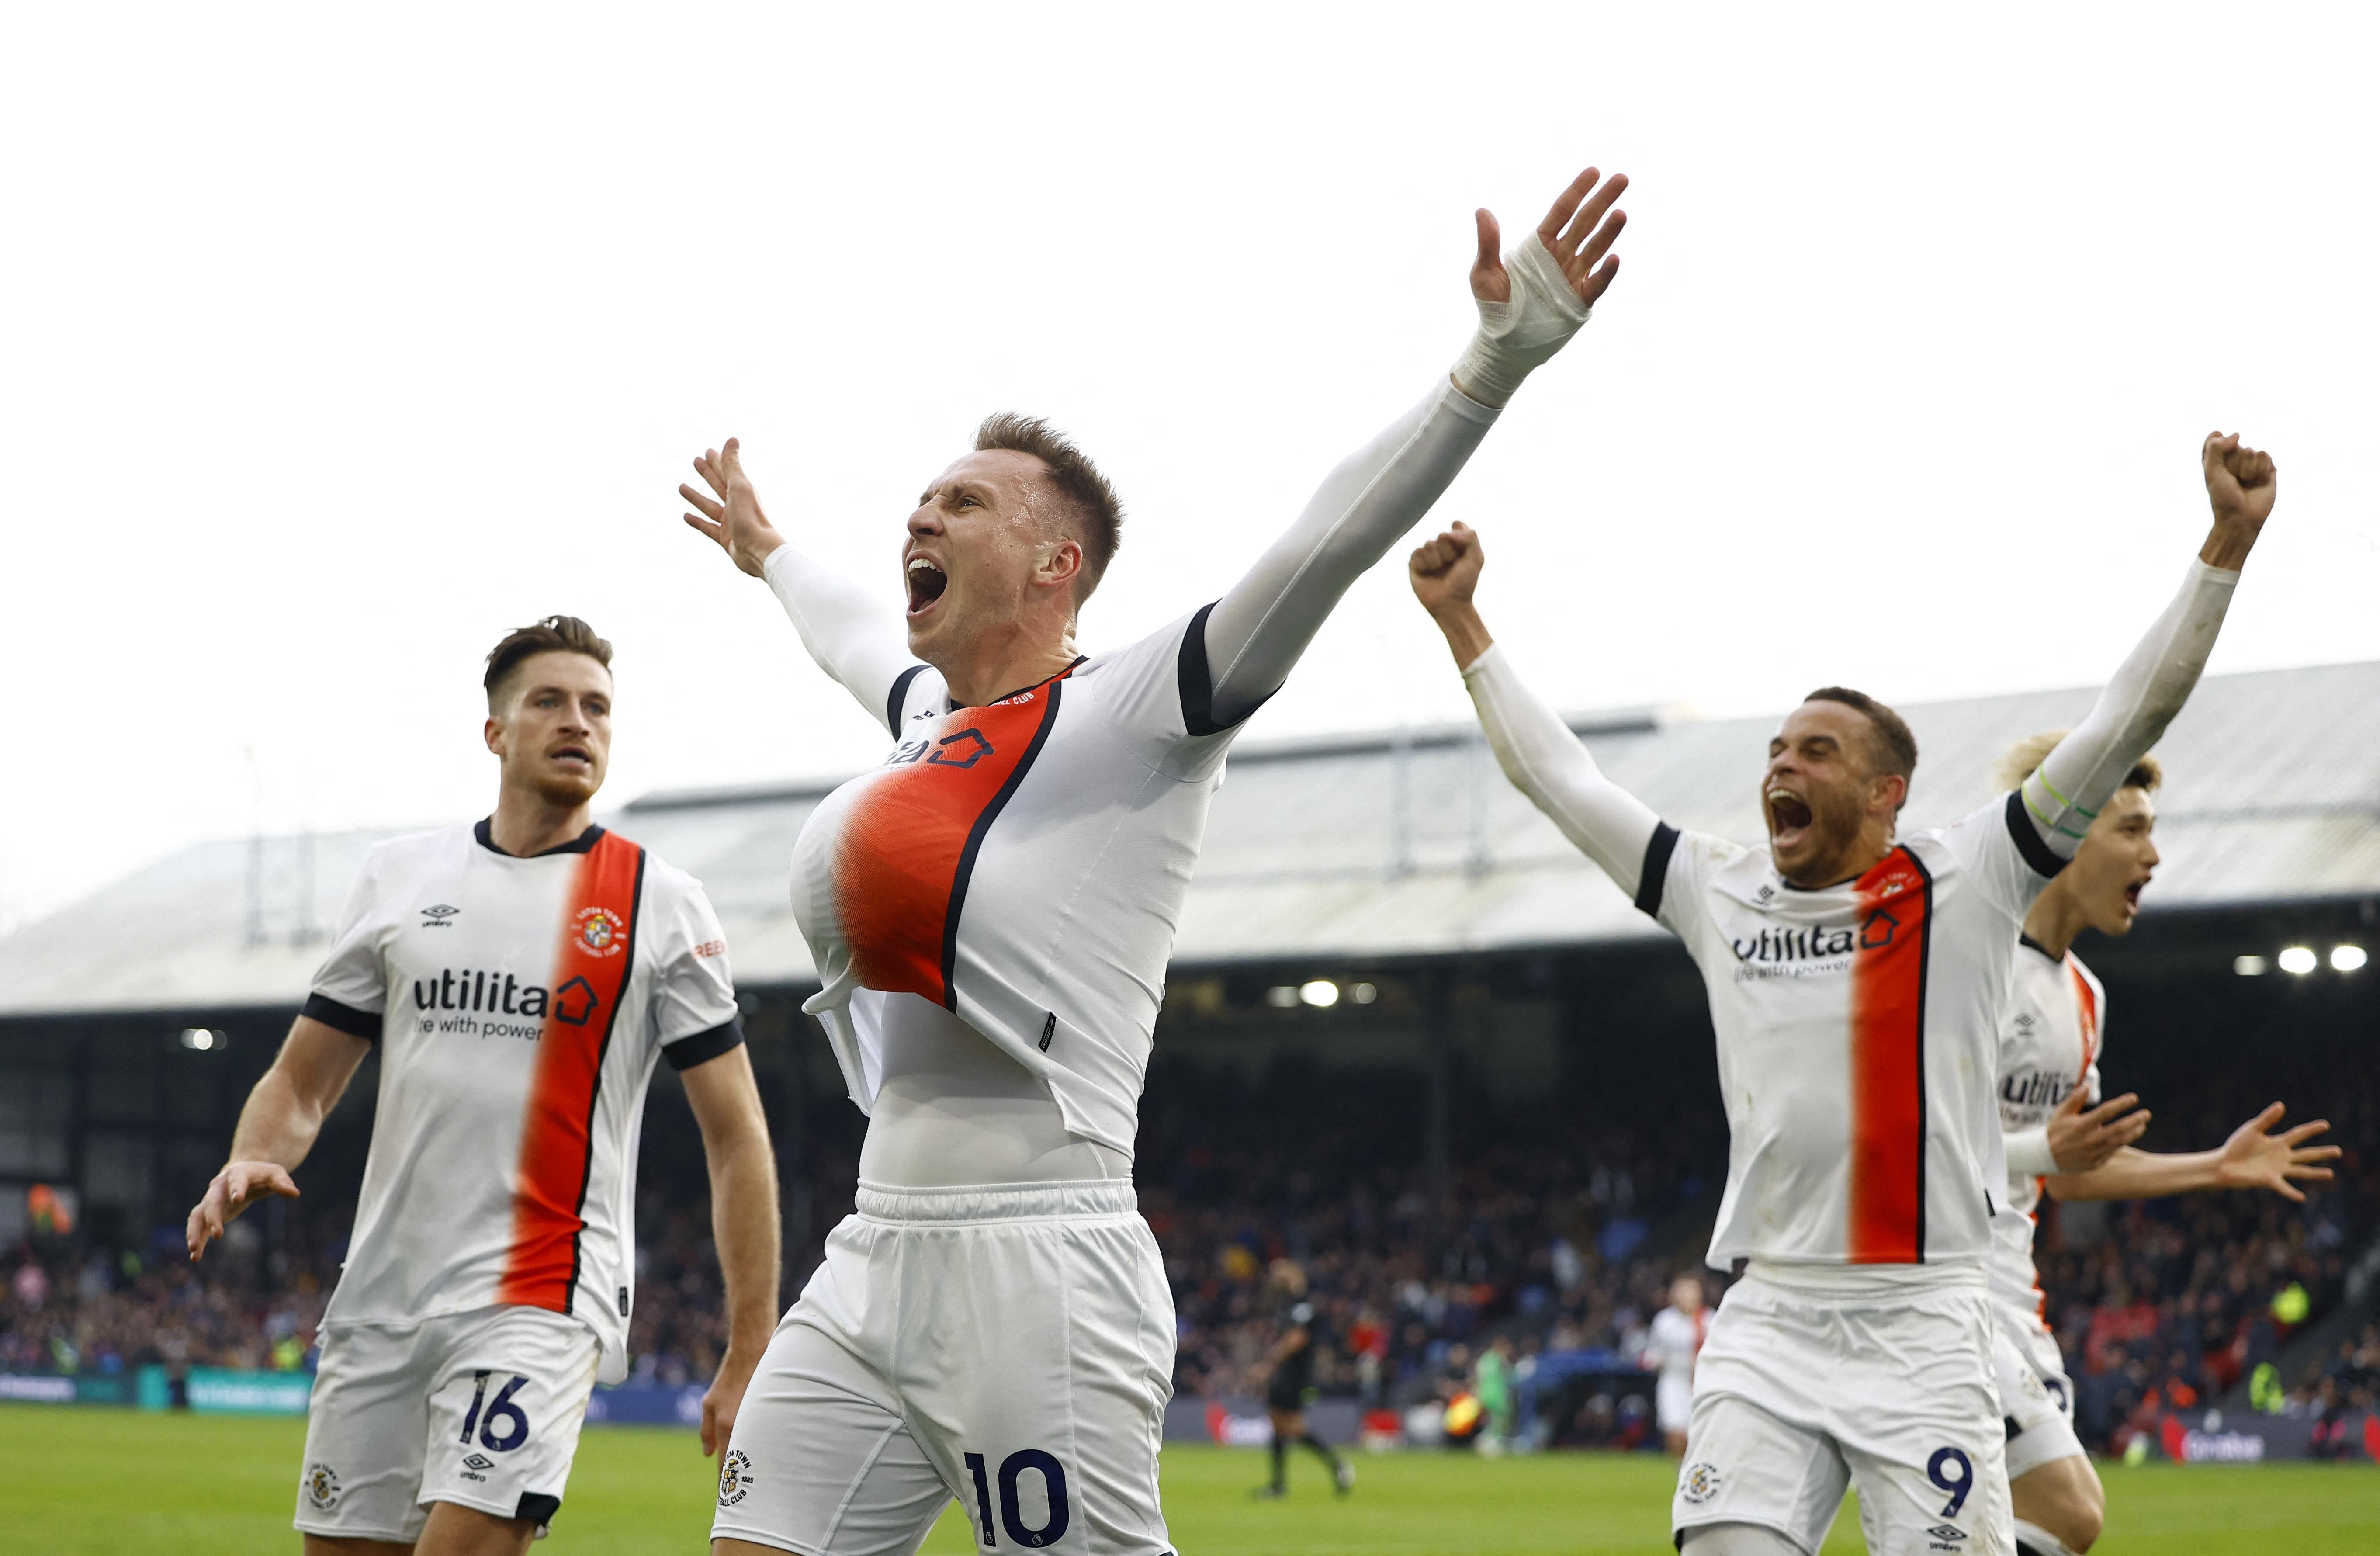 Cauley Woodrow late show salvages draw for Luton Town at Crystal Palace